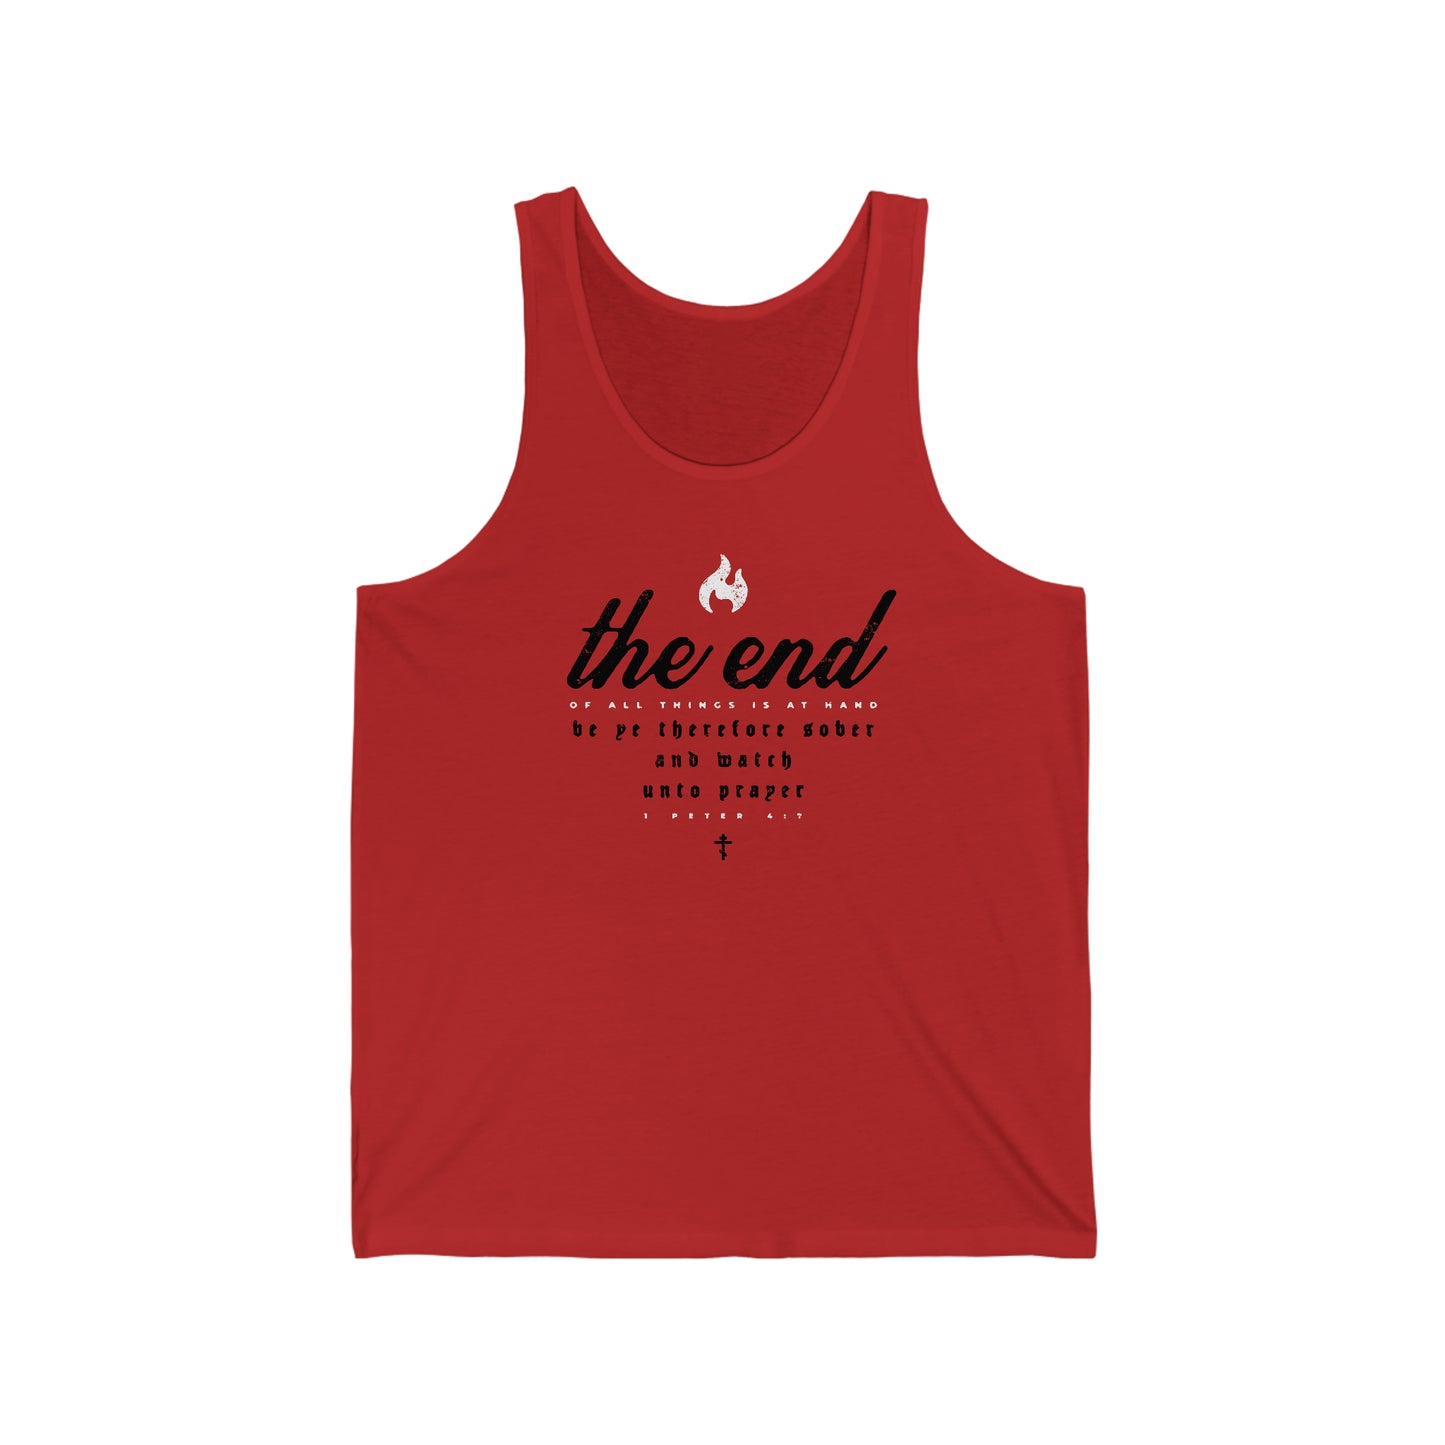 The End of All Things No. 5 | Orthodox Christian Jersey Tank Top / Sleeveless Shirt